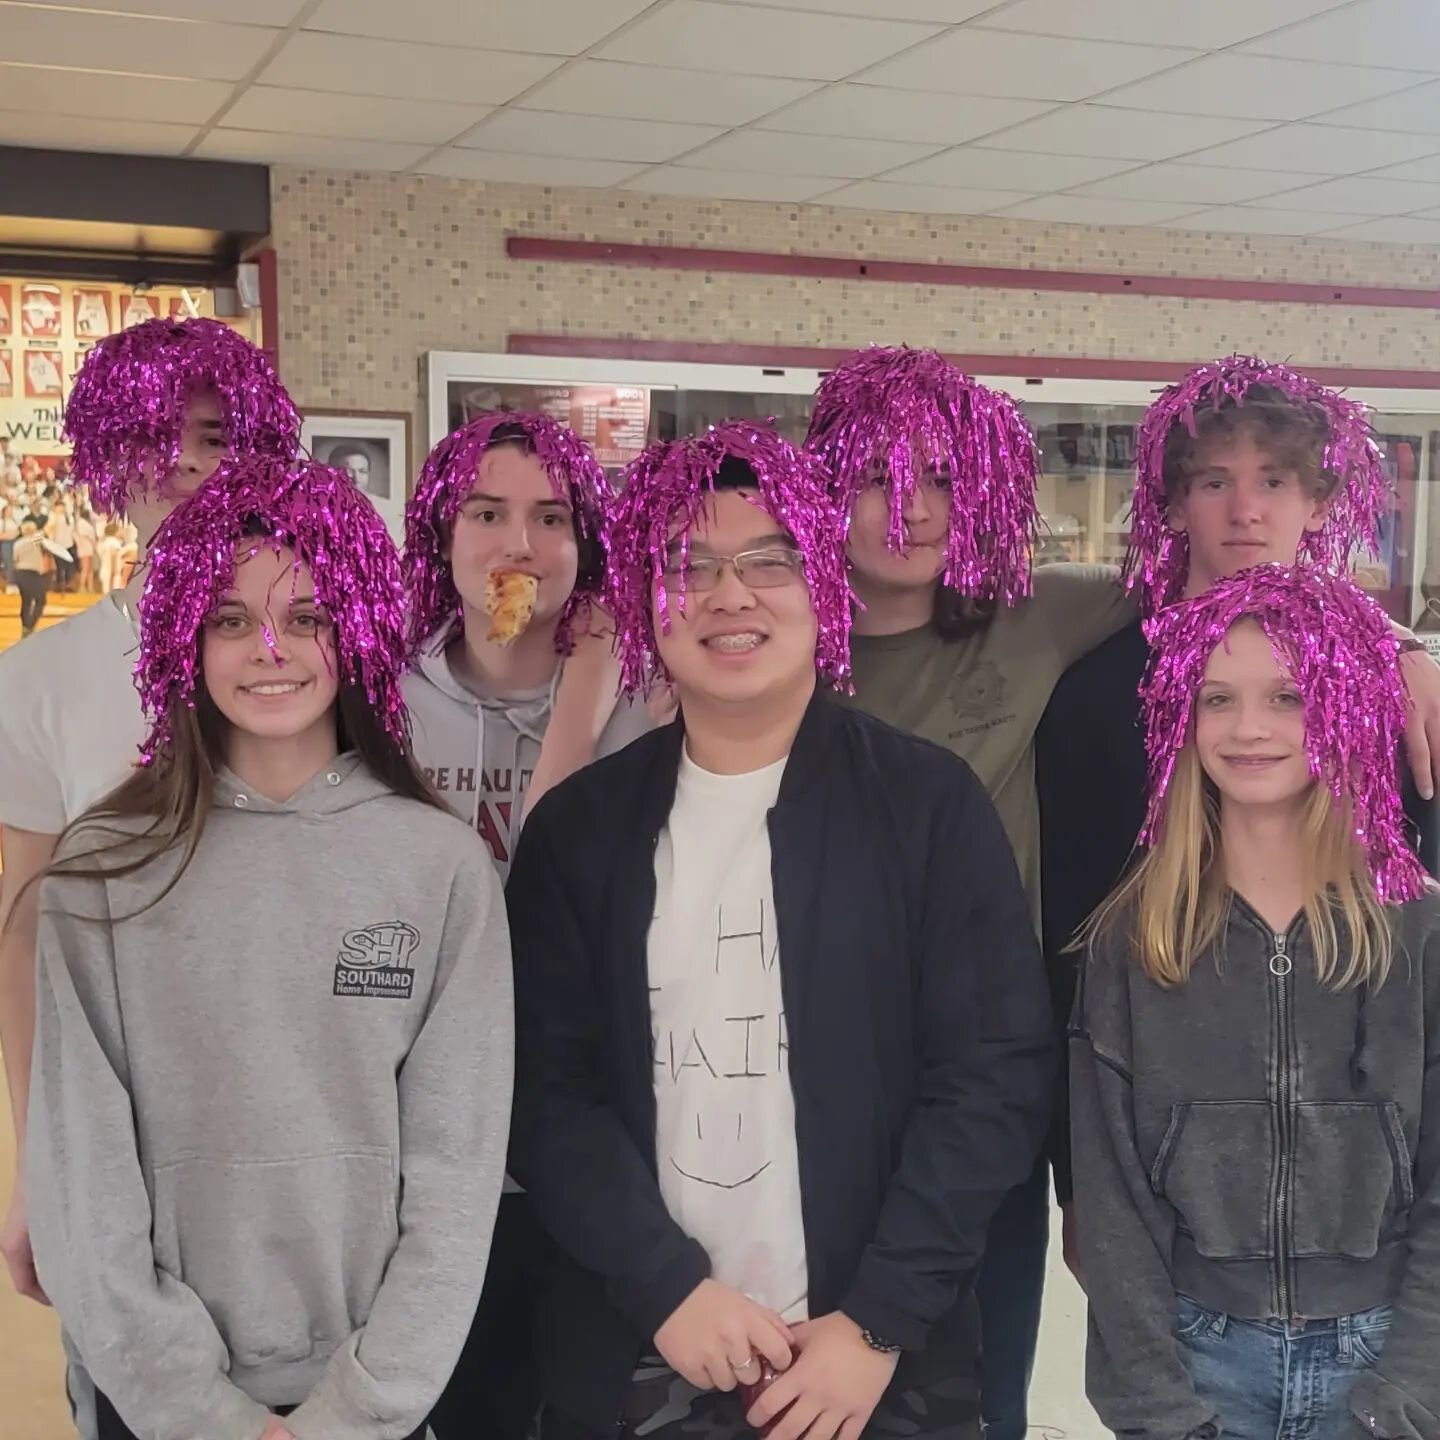 These kids helped collect money for the Big Wigs Susan G. Komen fundraiser last night at the basketball game!  So appreciated their help and everyone who donated! 

#wigoutforkomen
#bigwigsindiana
#studiocink
#paramedicaltattooing 
#3dareolatattoo 
#